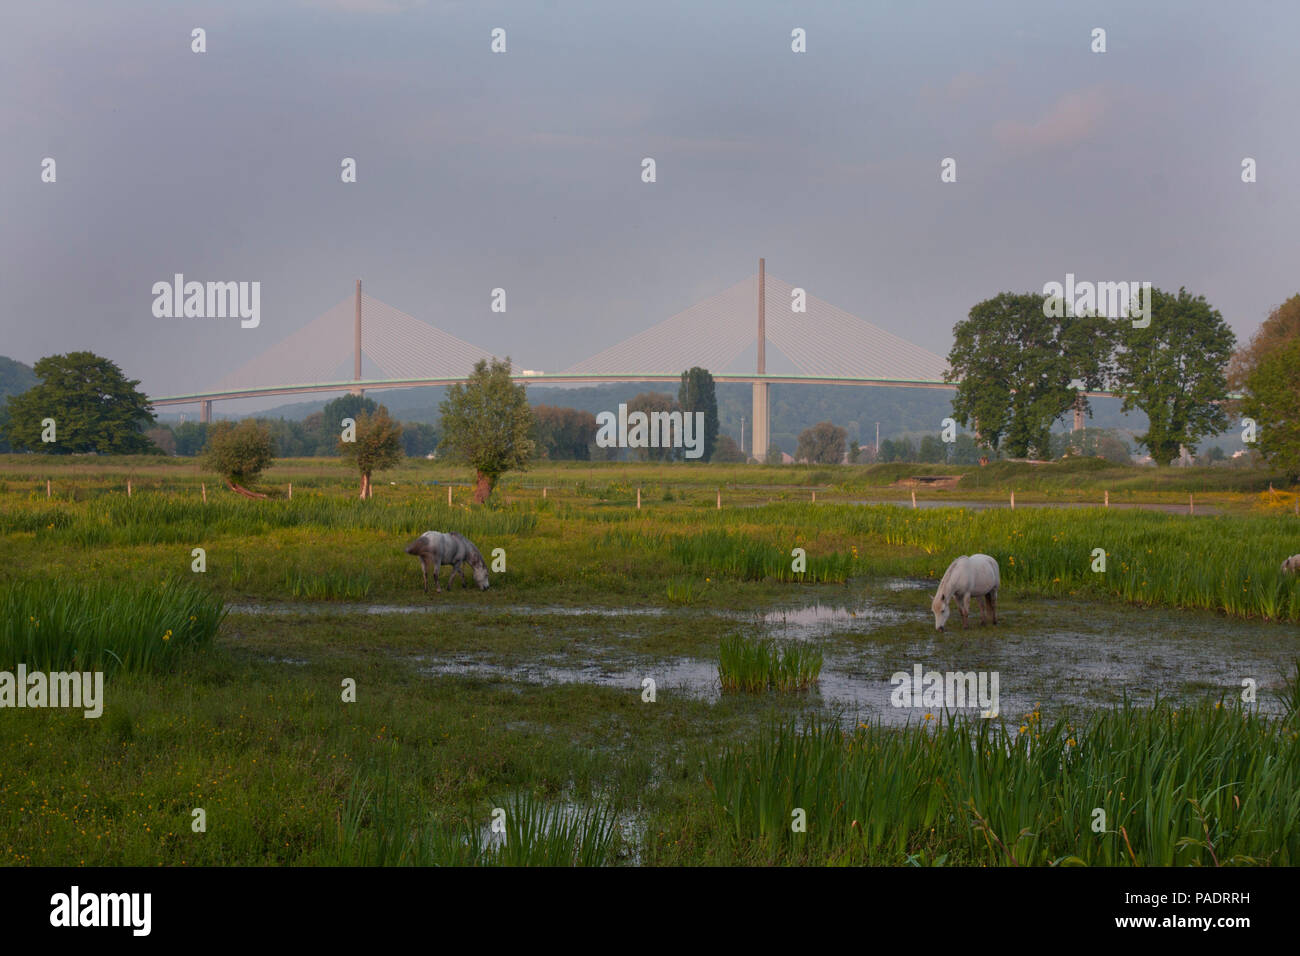 horses grazing in field with view of Pont de Brotonne (Brotonne Bridge) crossing the River Seine, Seine Maritime, north Normandy, France Stock Photo